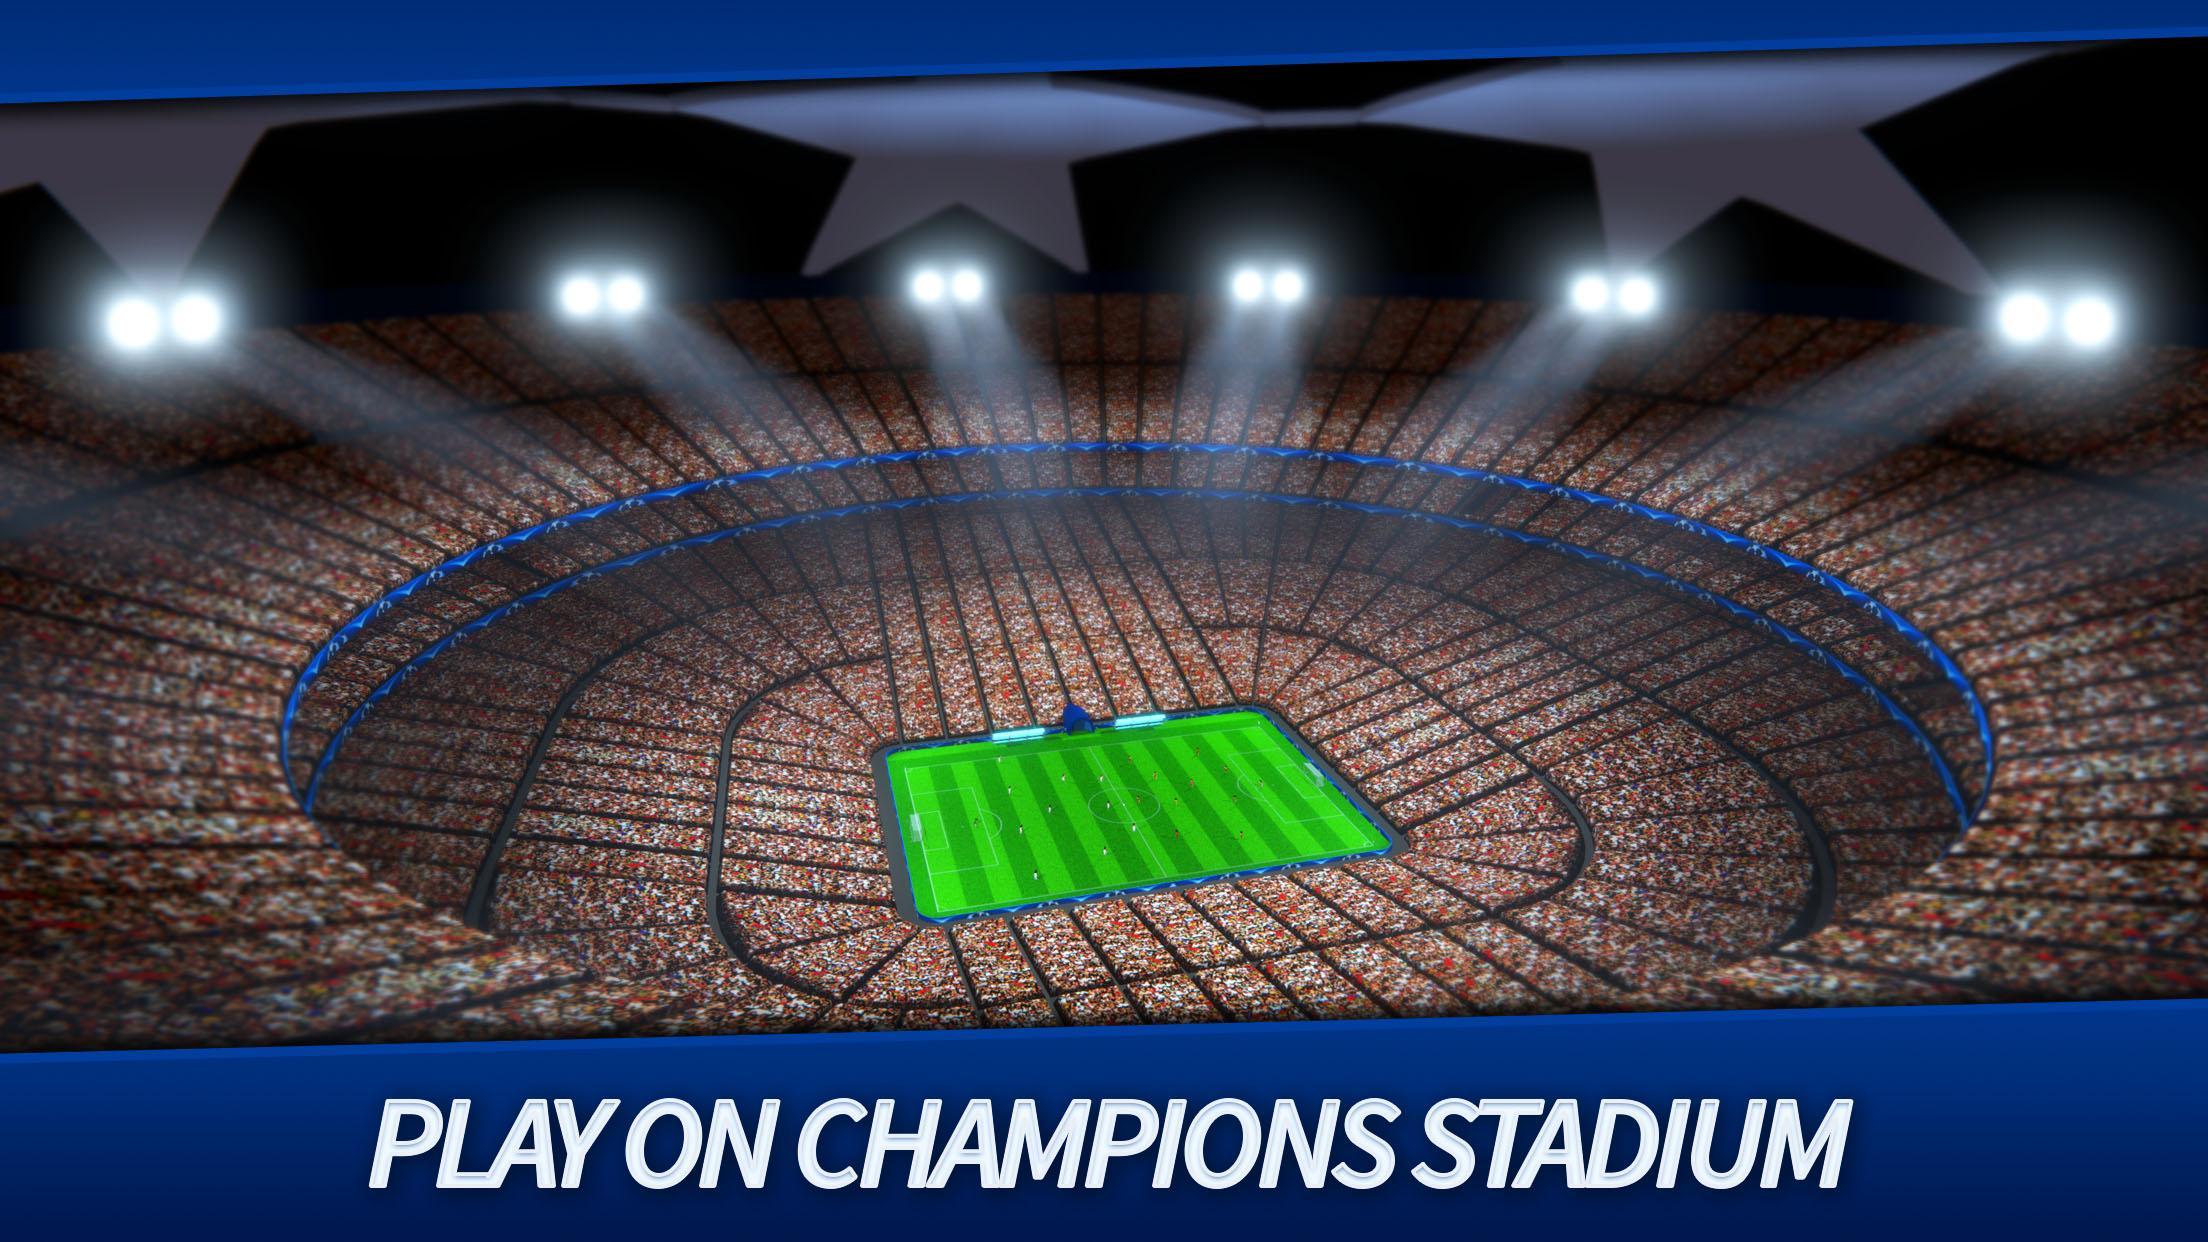 Football League Kids Champions for Android - APK Download